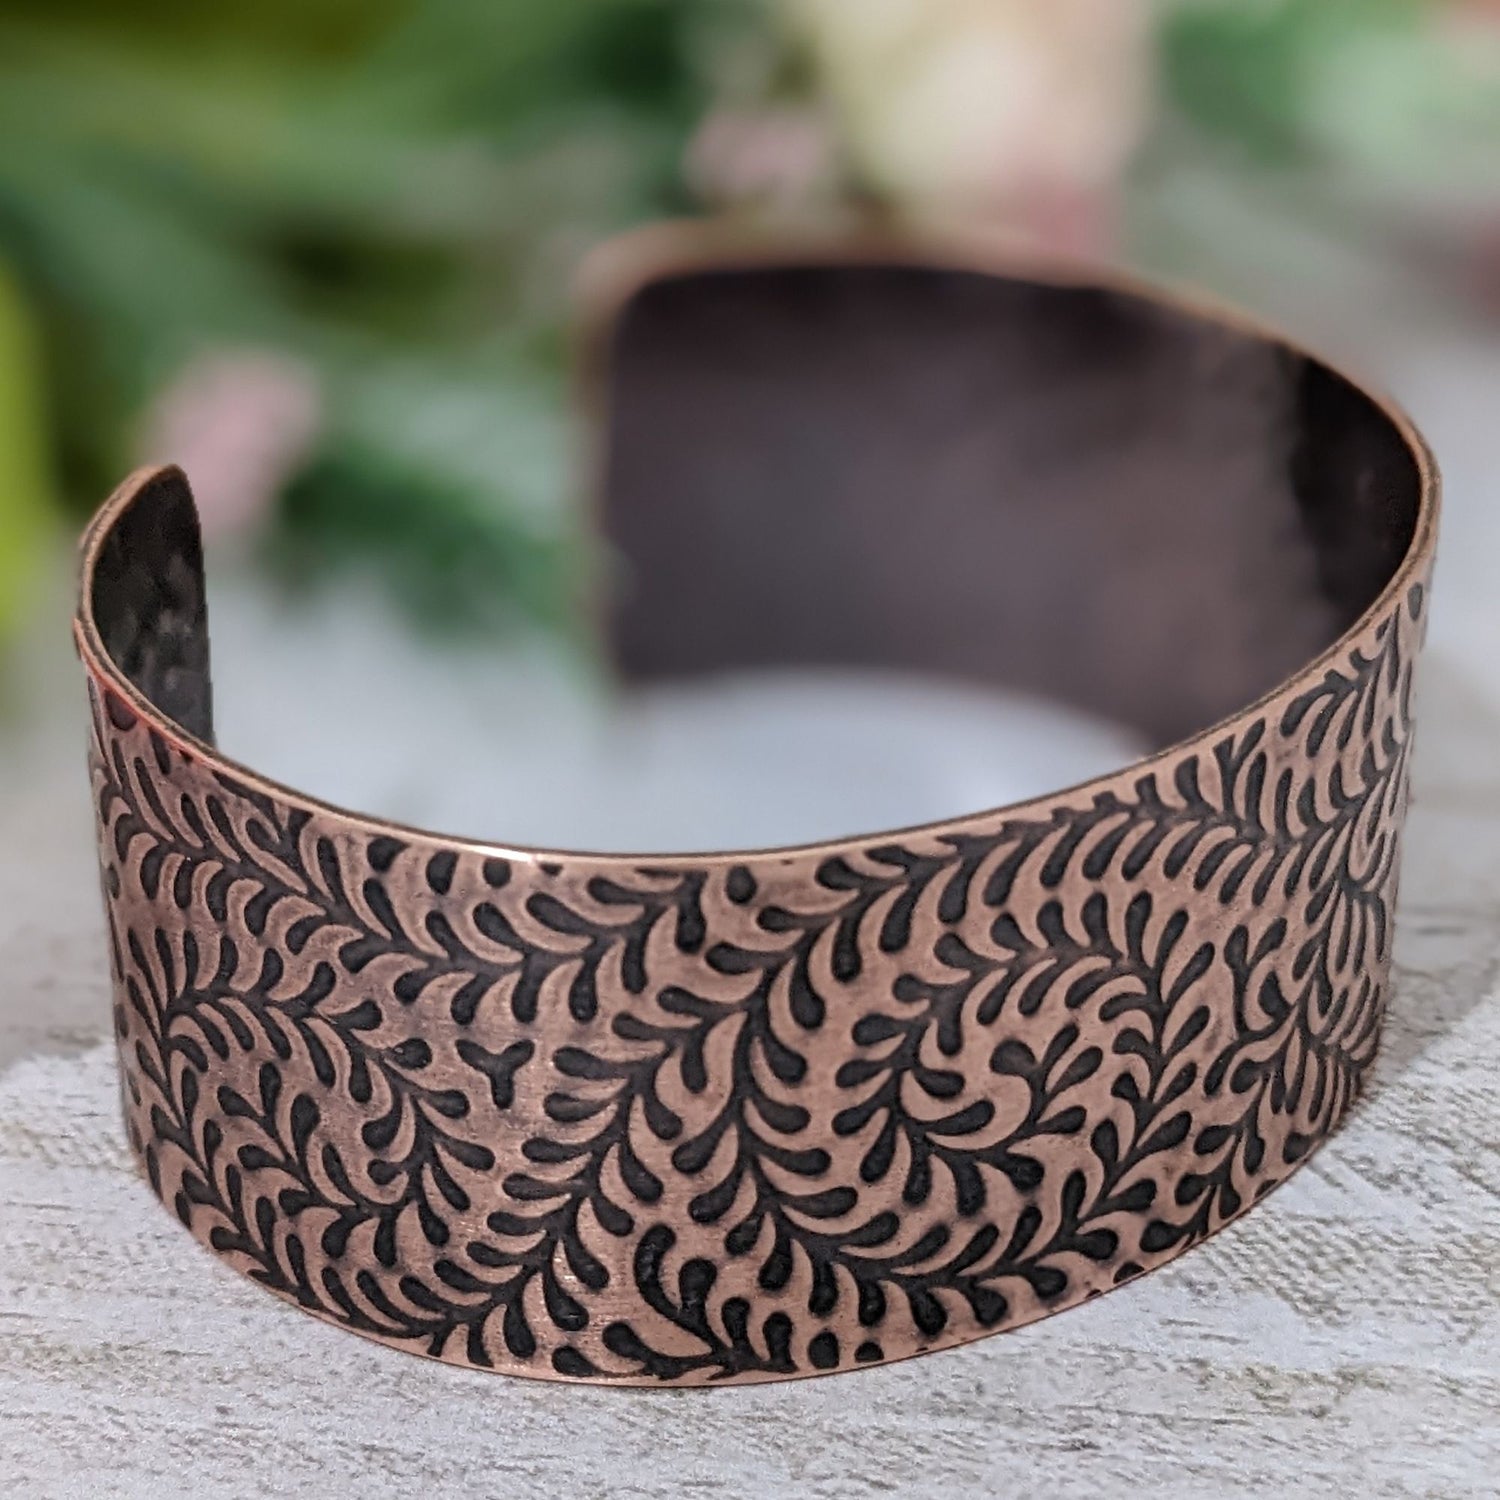 One inch wide copper cuff bracelet with impression design of a fiddlehead fern. The design is abstract. The recessed parts of the design are darkened to accentuate the detail.